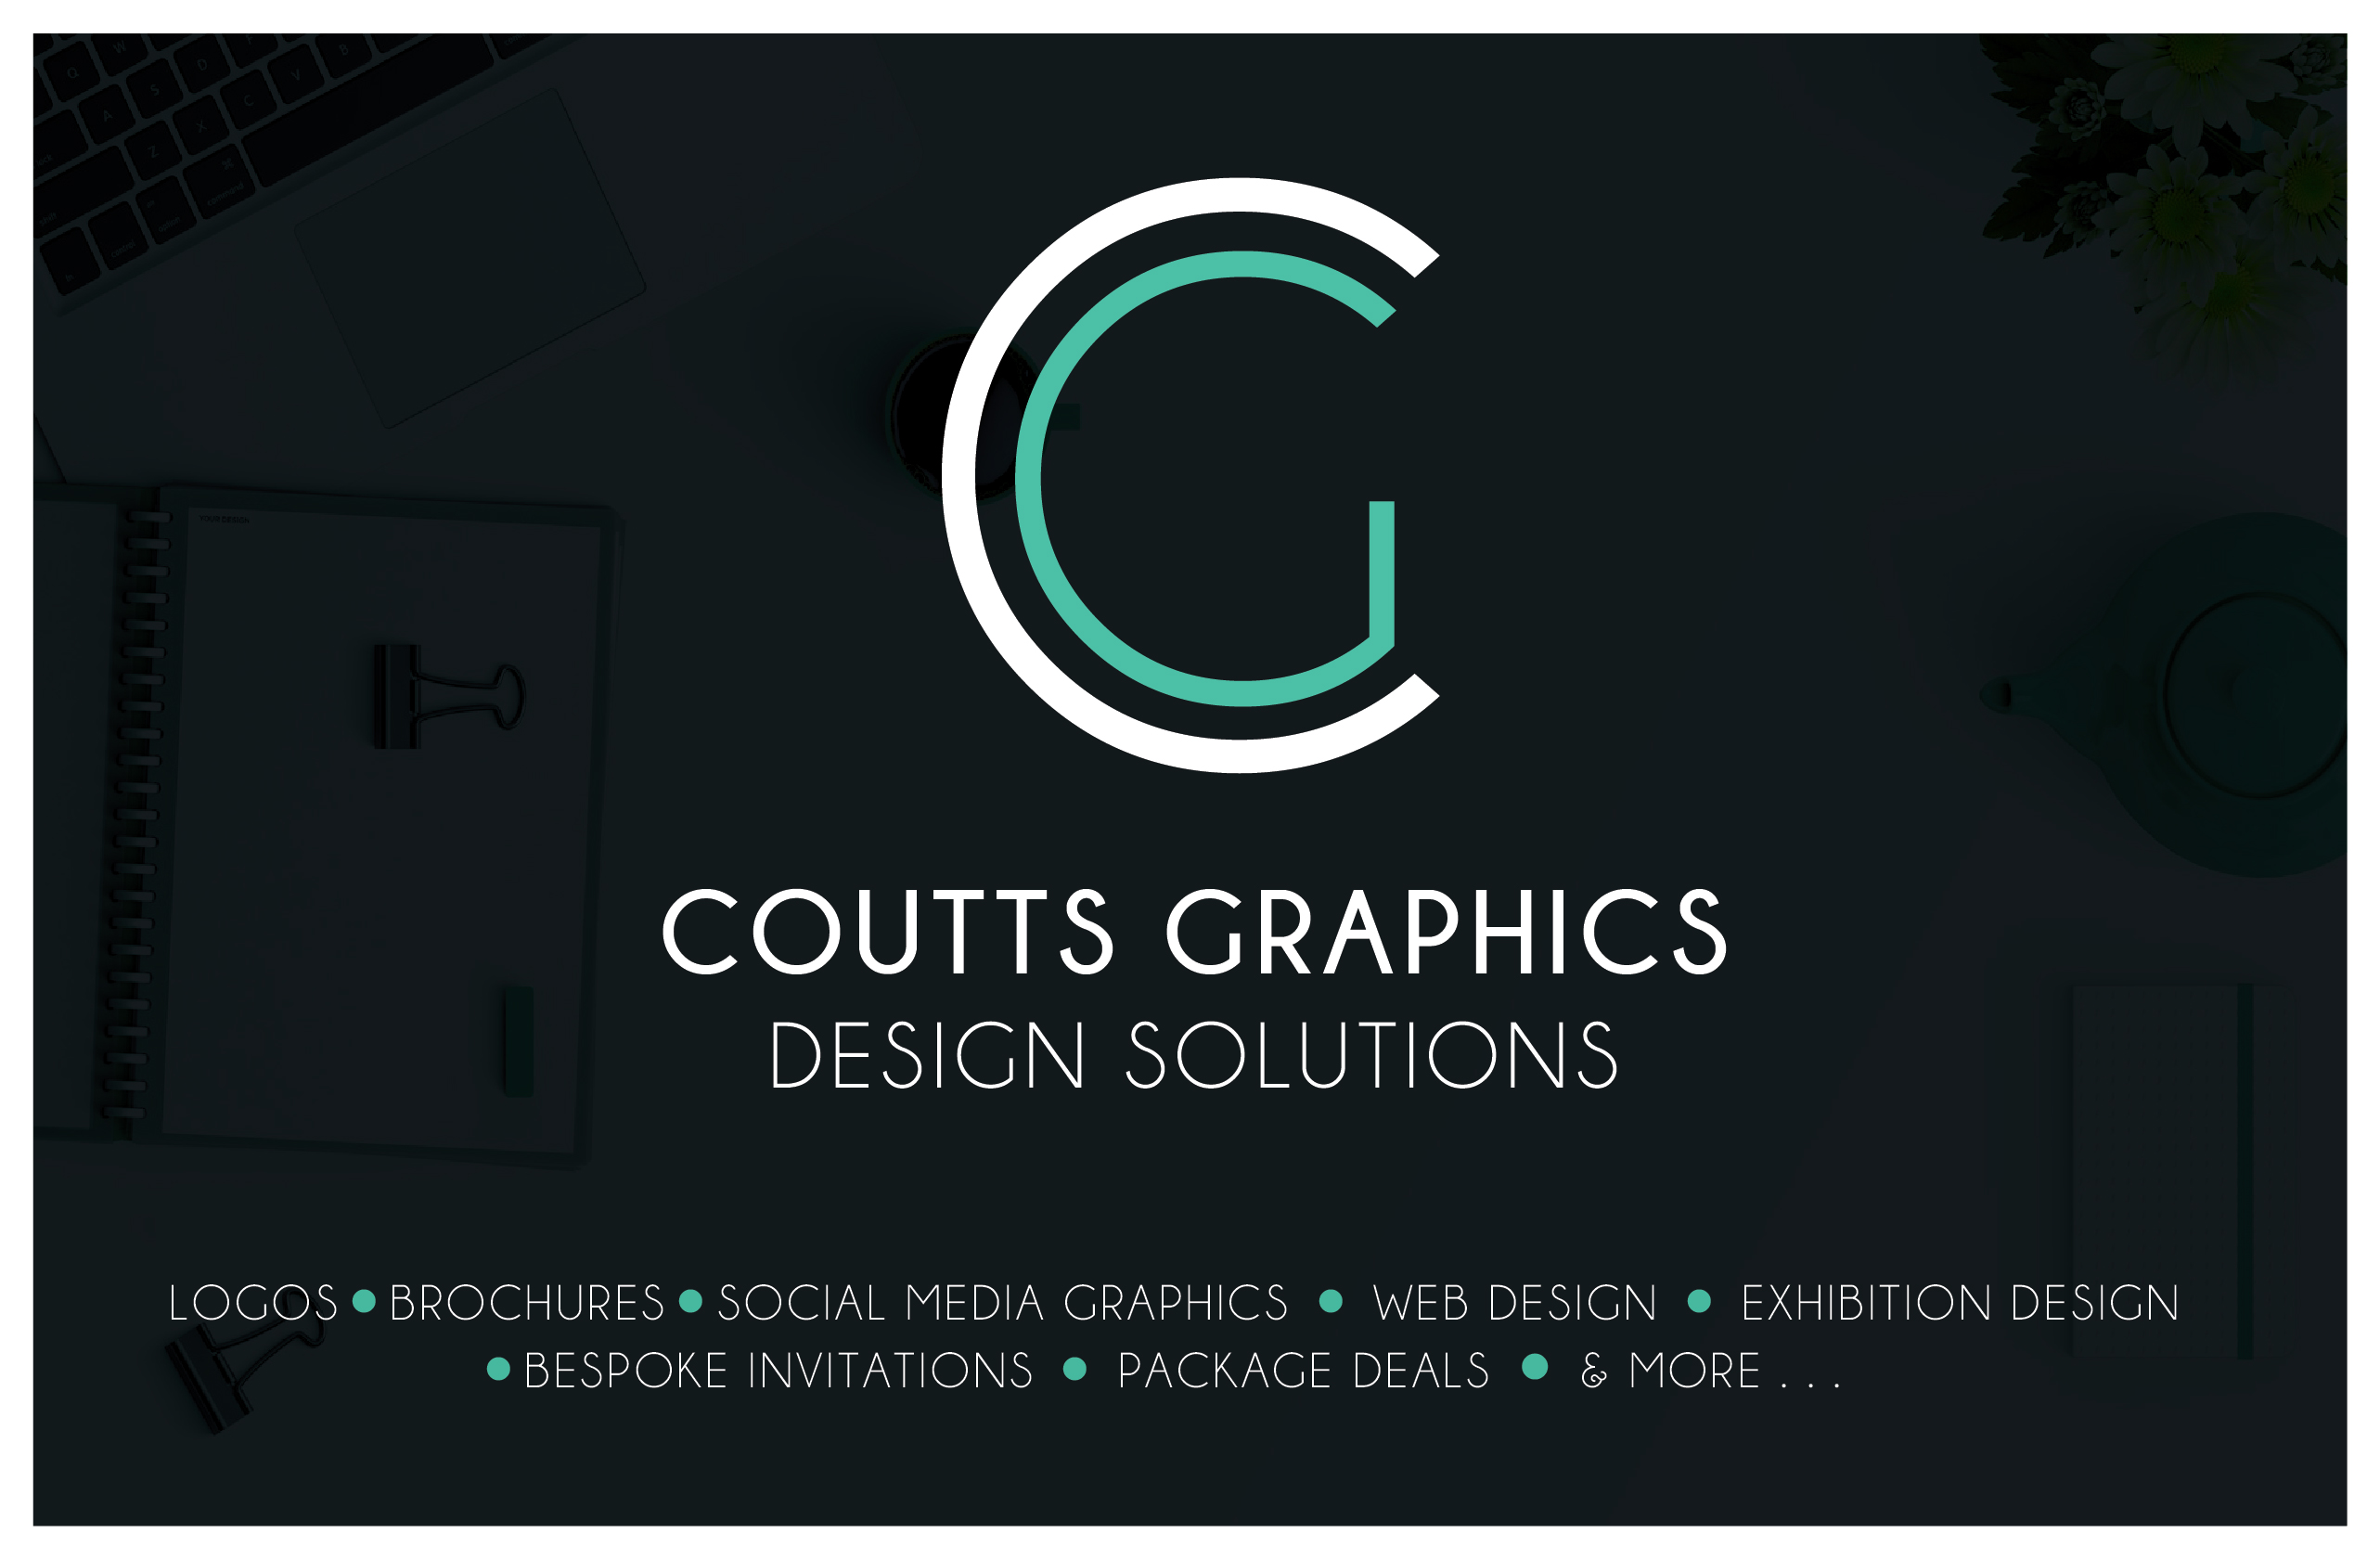 COUTTS GRAPHICS
DESICN SOLUTIONS

LOCOS @ BROCHURES ® SOCIAL MEDIA GRAPHICS ® WEB DESICN e EXHIBITION DESIGN
® BESPOKE INVITATIONS ® PACKAGE DEALS ® & MORE . ..